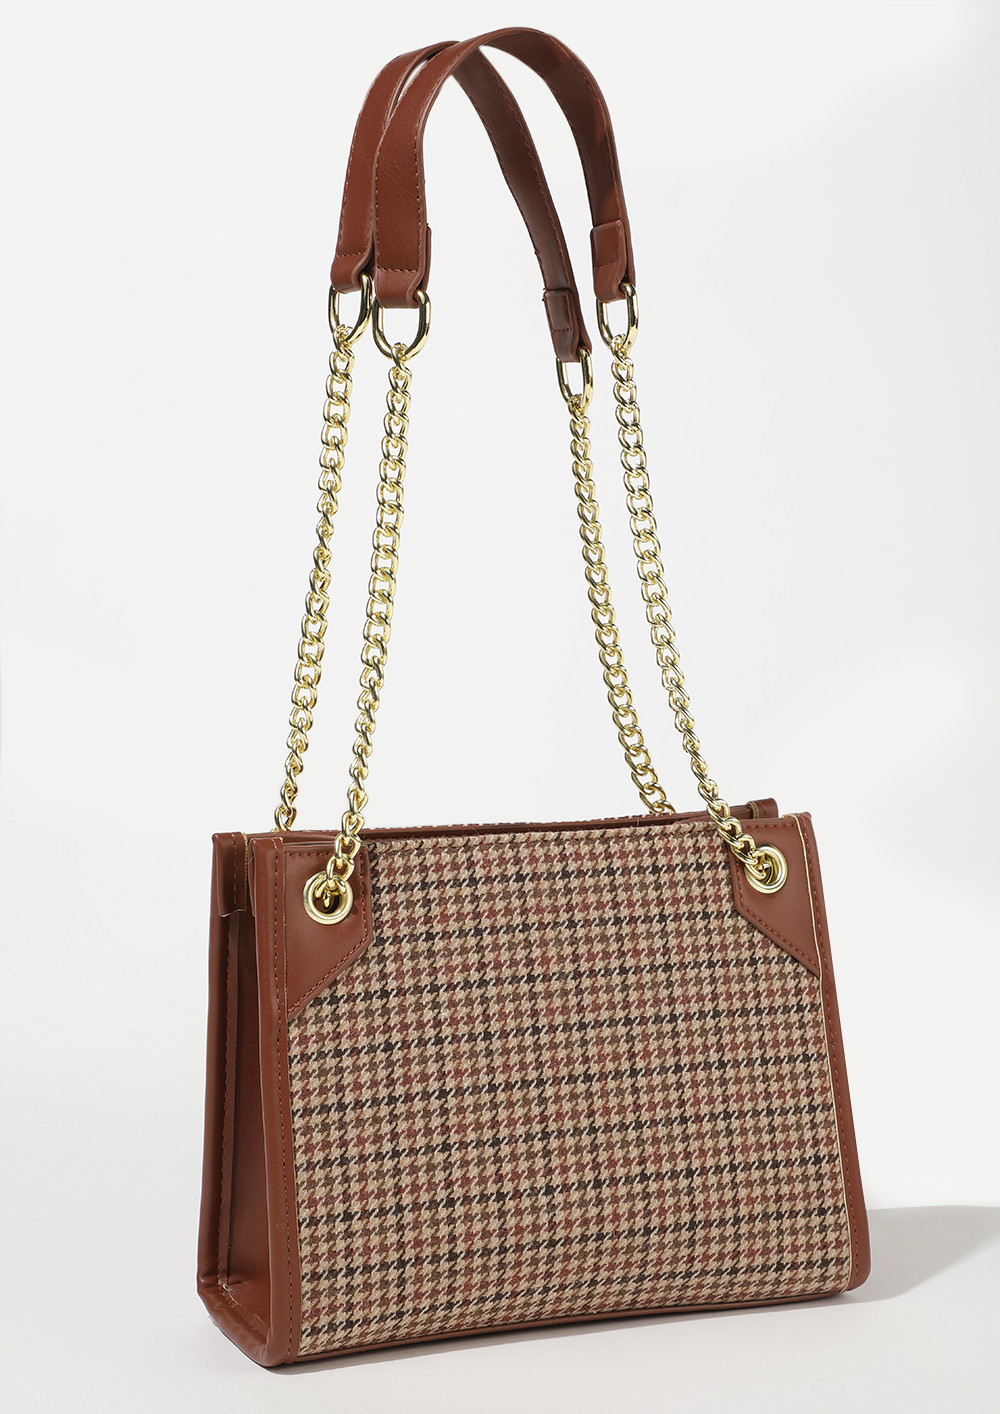 PATTERN FALL OUT BROWN TOTE BAG